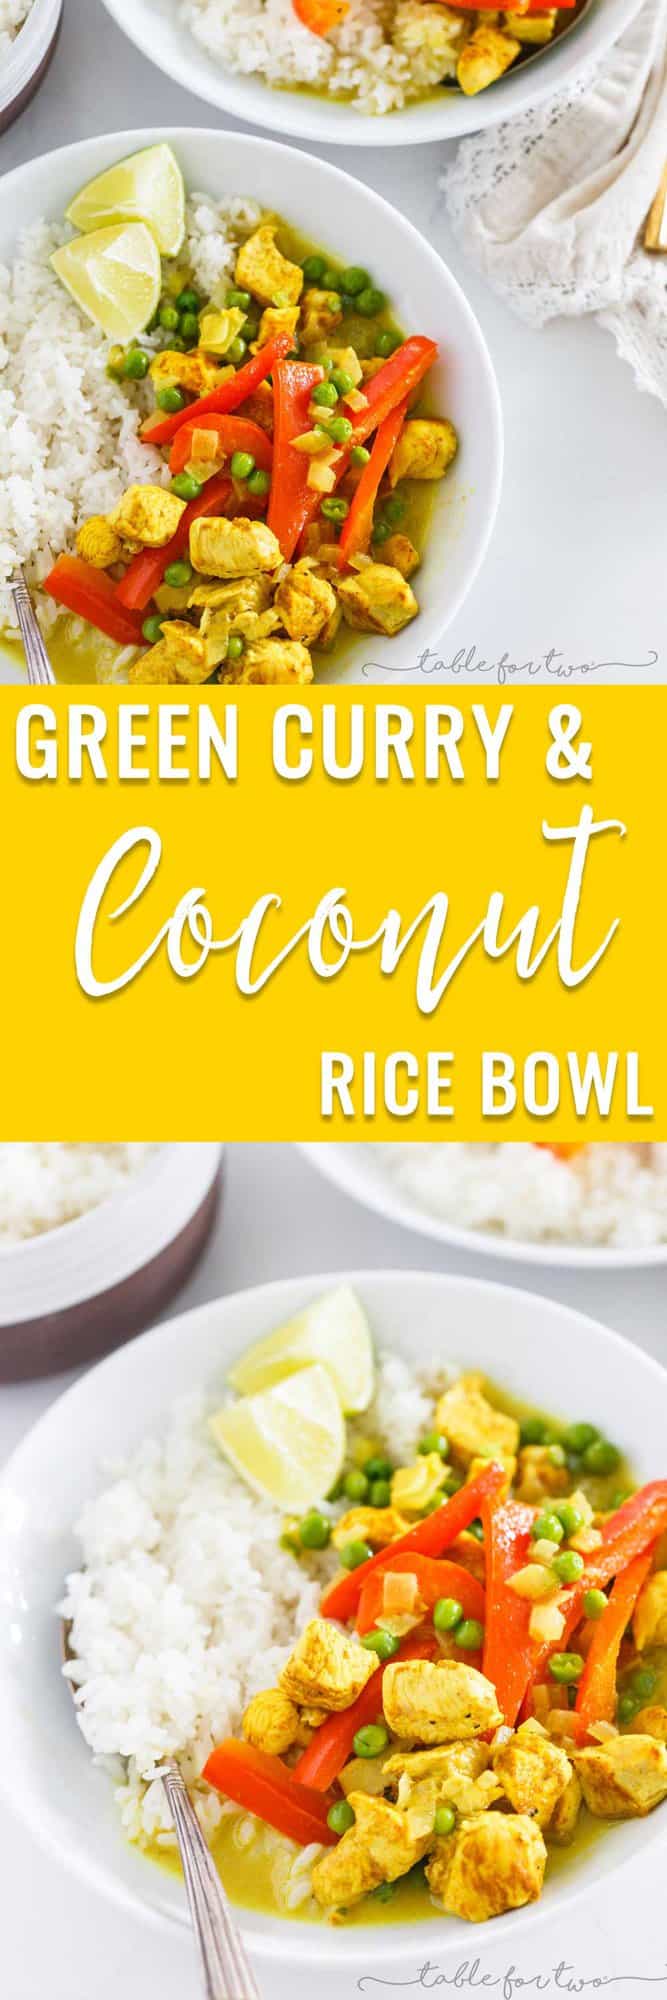 This green curry and coconut rice bowl is a delightfully flavorful easy weeknight meal or for meal prep. Simple to throw together yet not lacking in flavor one bit!